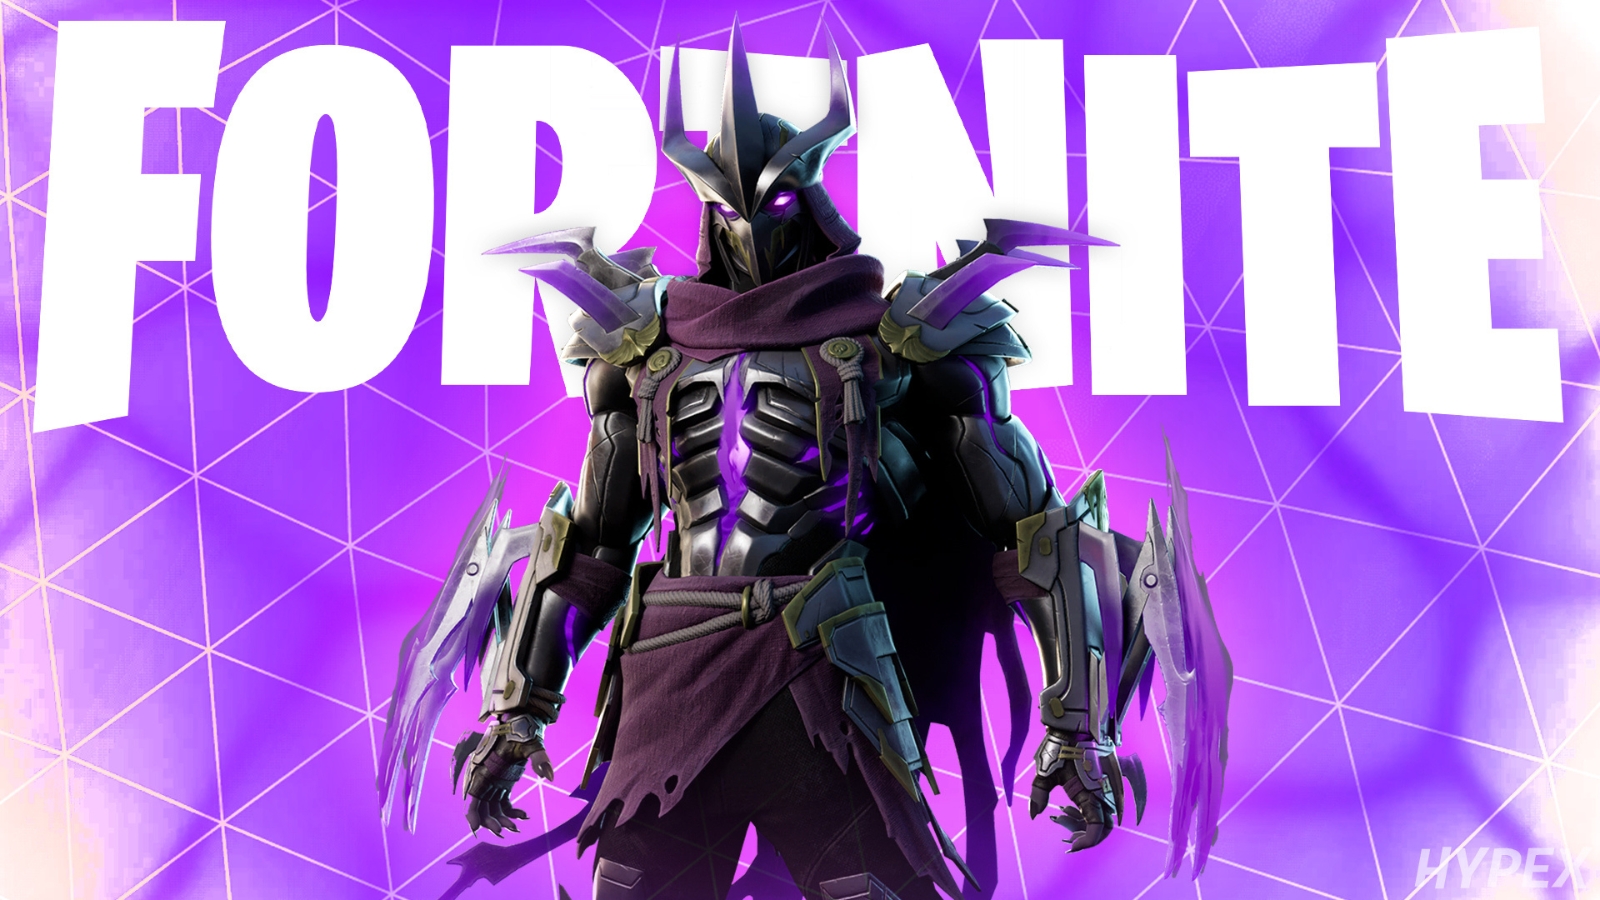 Latest patch notes for Fortnite - Dexerto